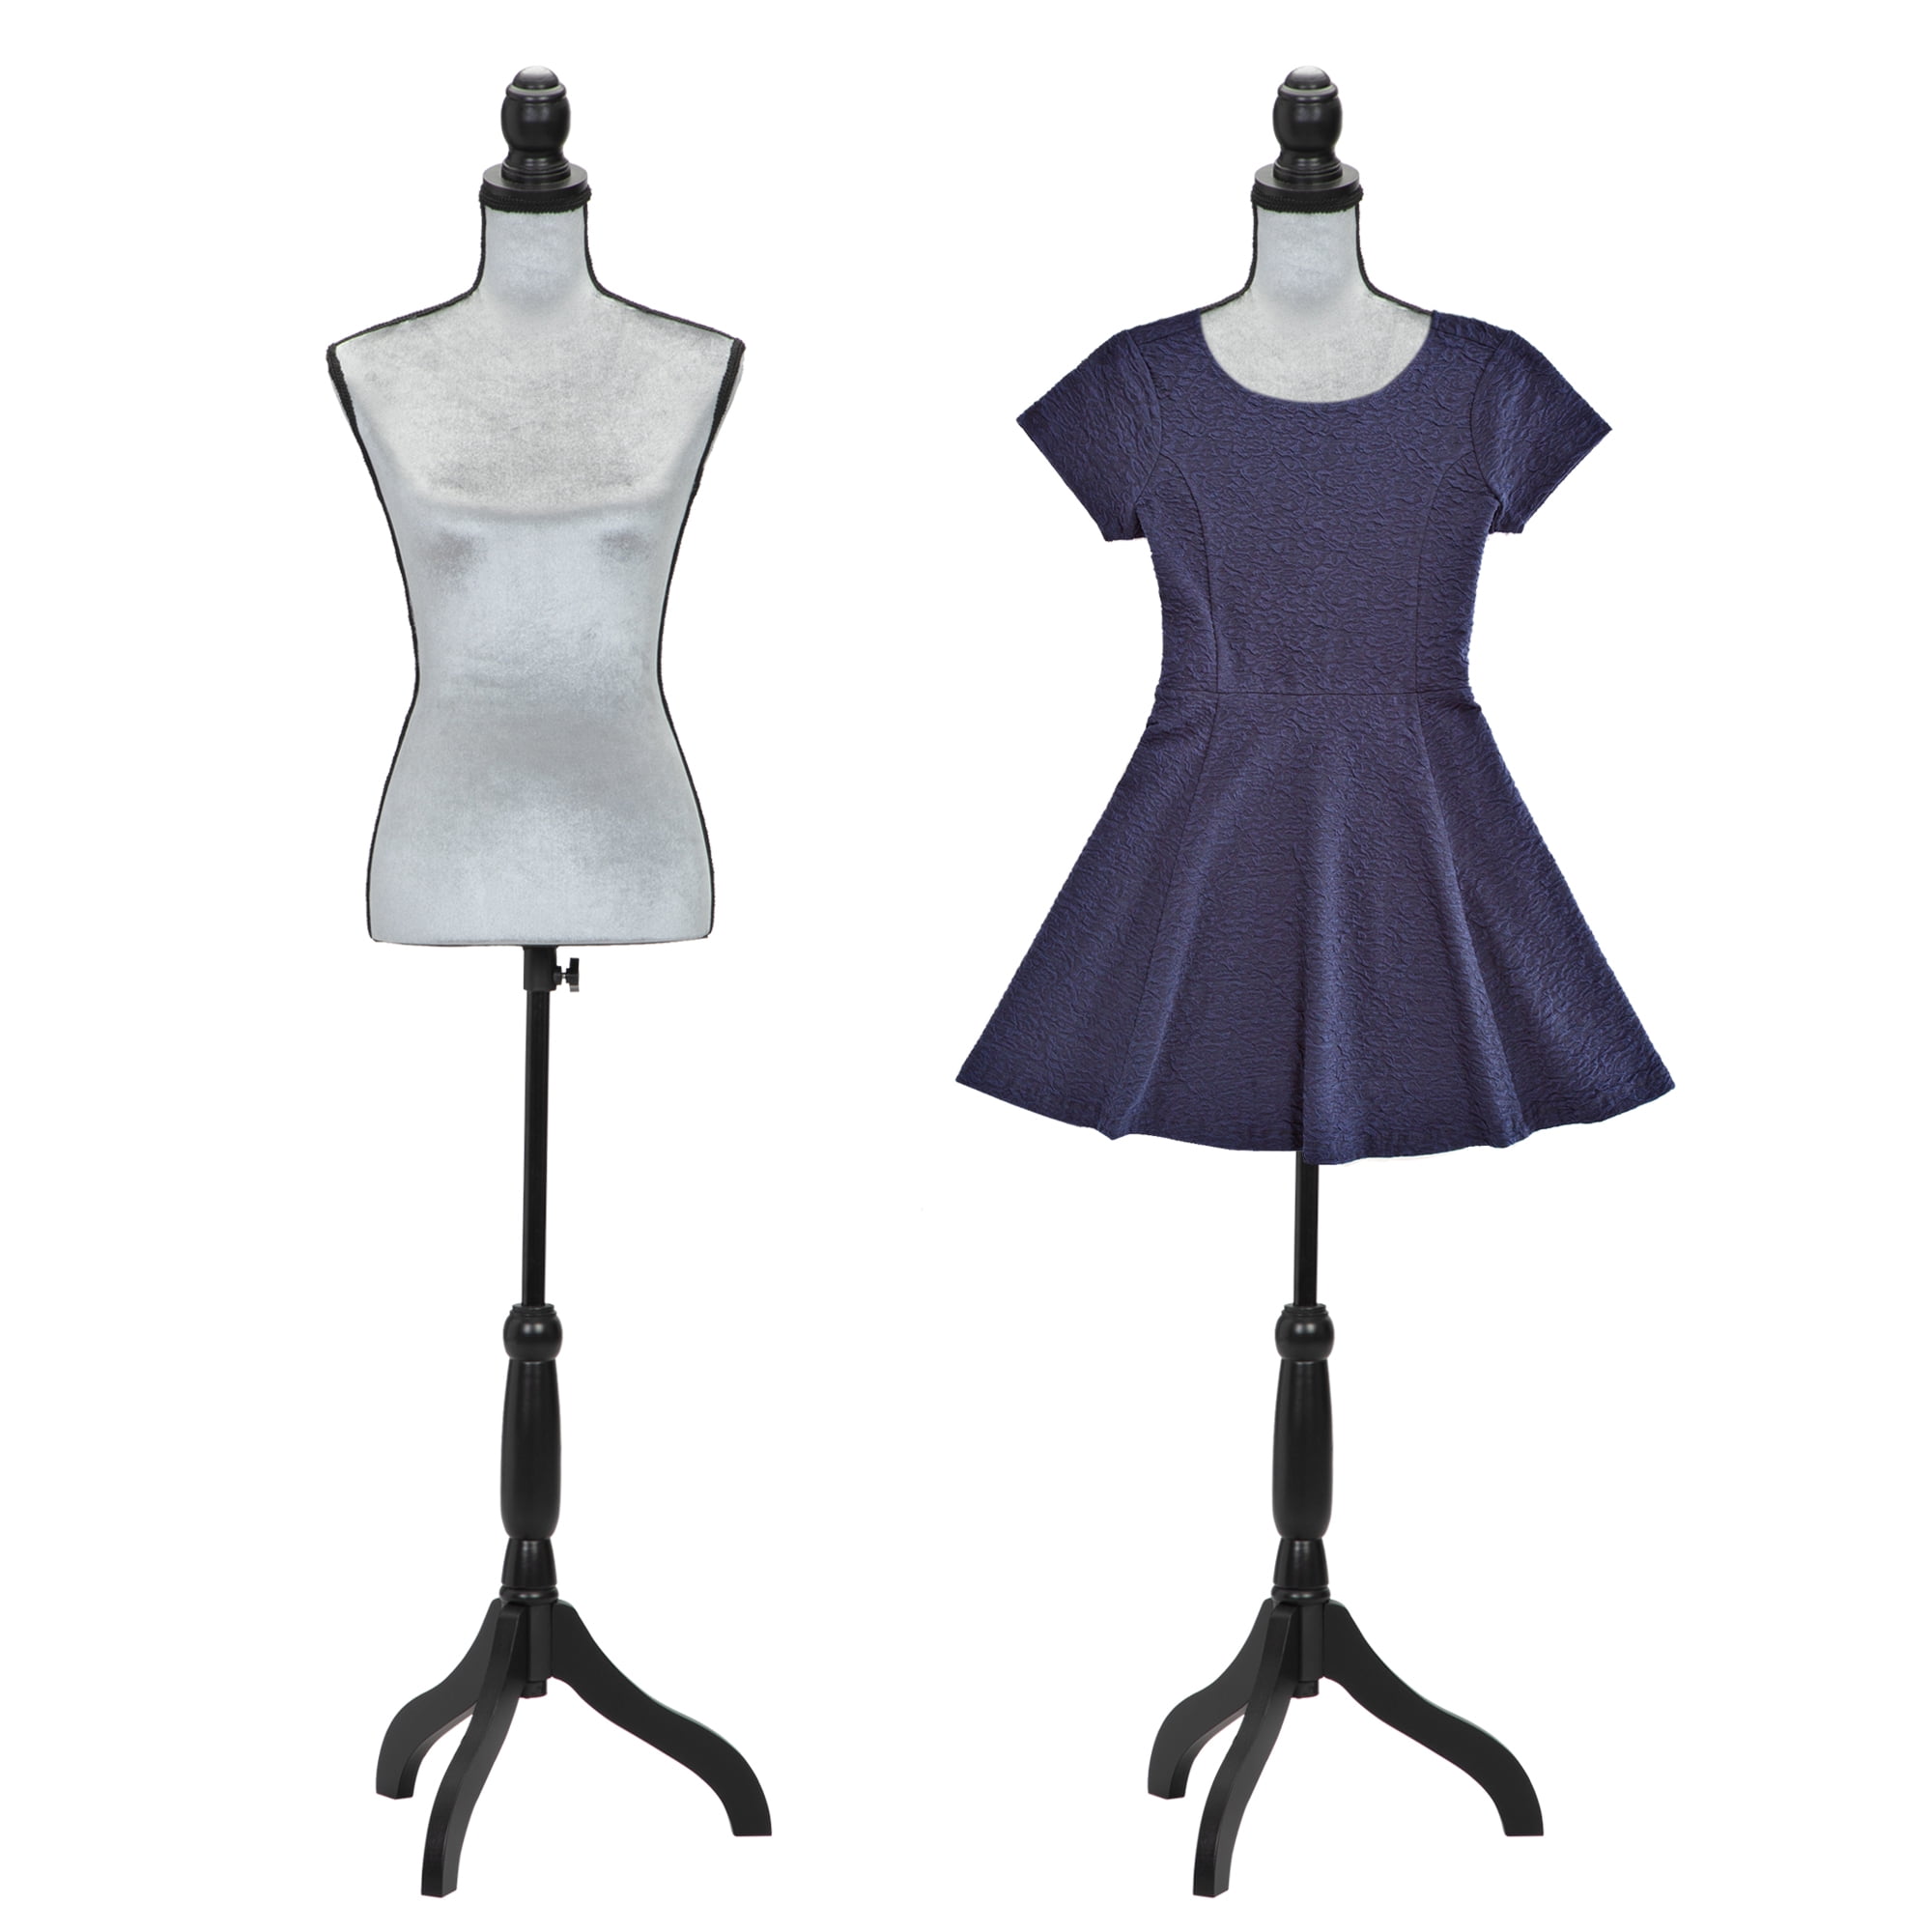 Details about   Female Model Full Body Mannequin Realistic Display Clothes Dress Form w/ Base US 